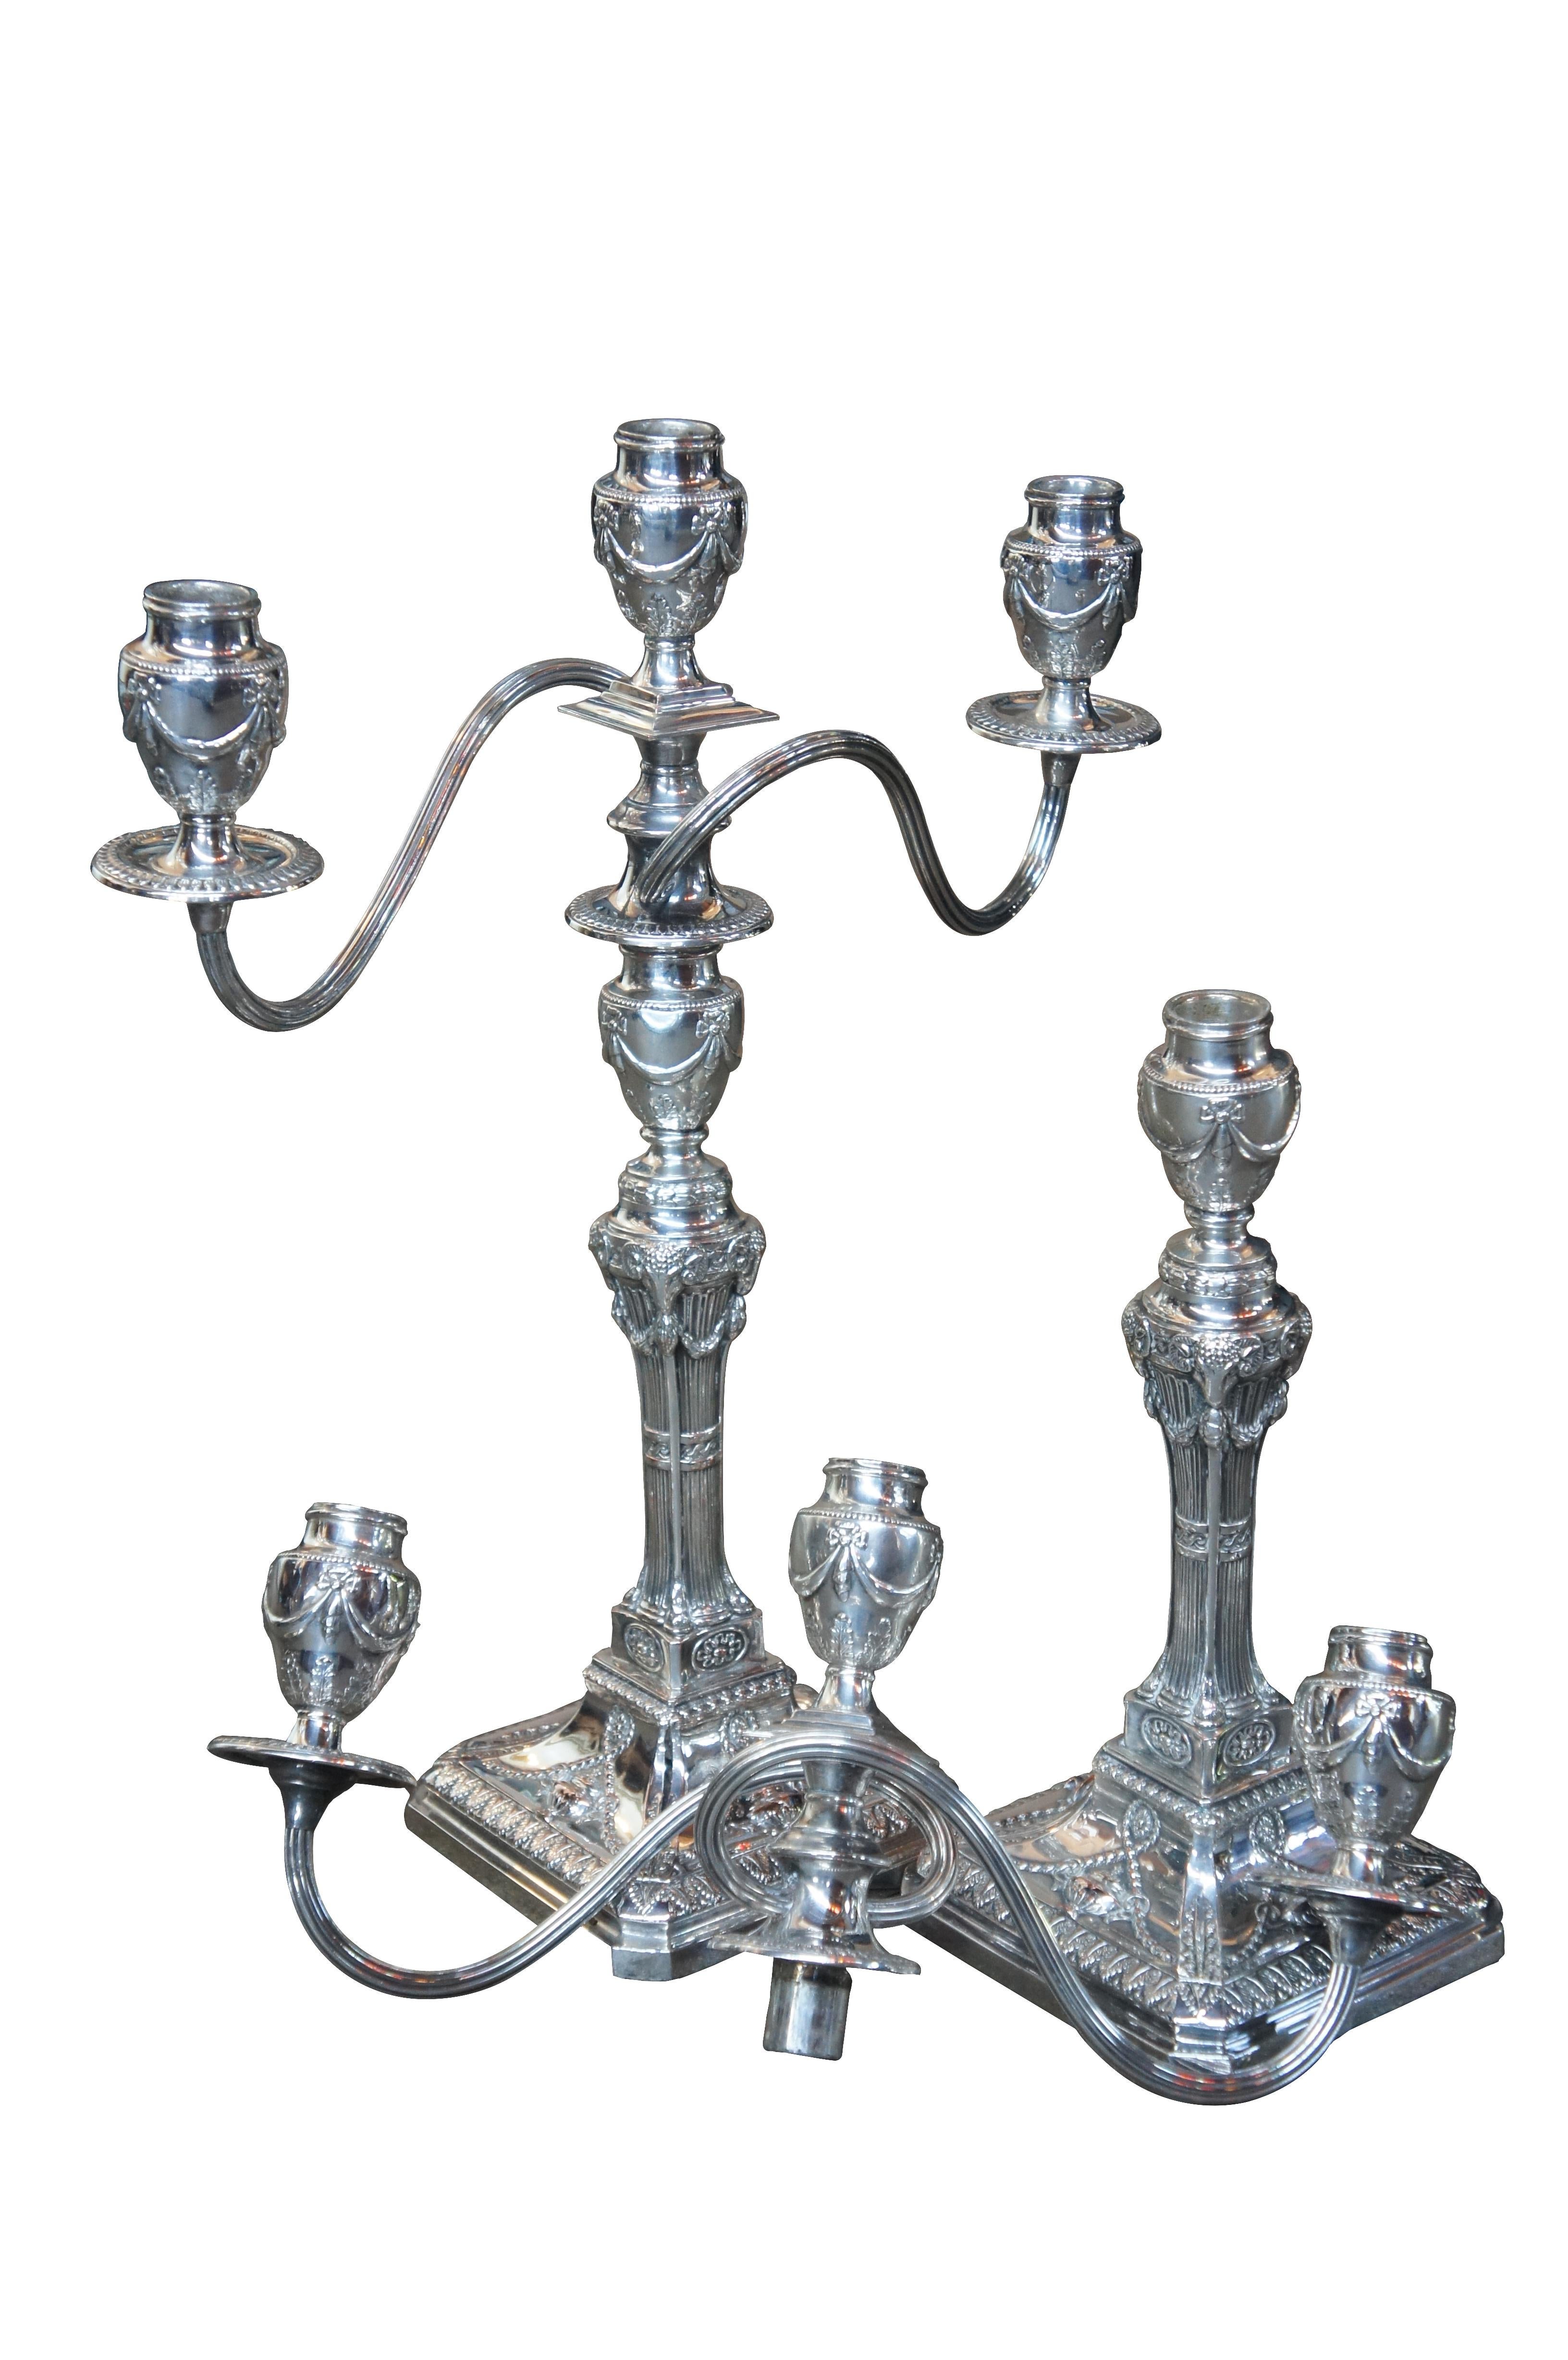 Antique Georgian silver plate candelabra English candlesticks rams head MS Rau

This beautiful antique pair of silver plate candelabras was purchase in New Orleans from M.S Rau antiques, circa1990s.
Highly engraved, featuring trophy's, scrolled